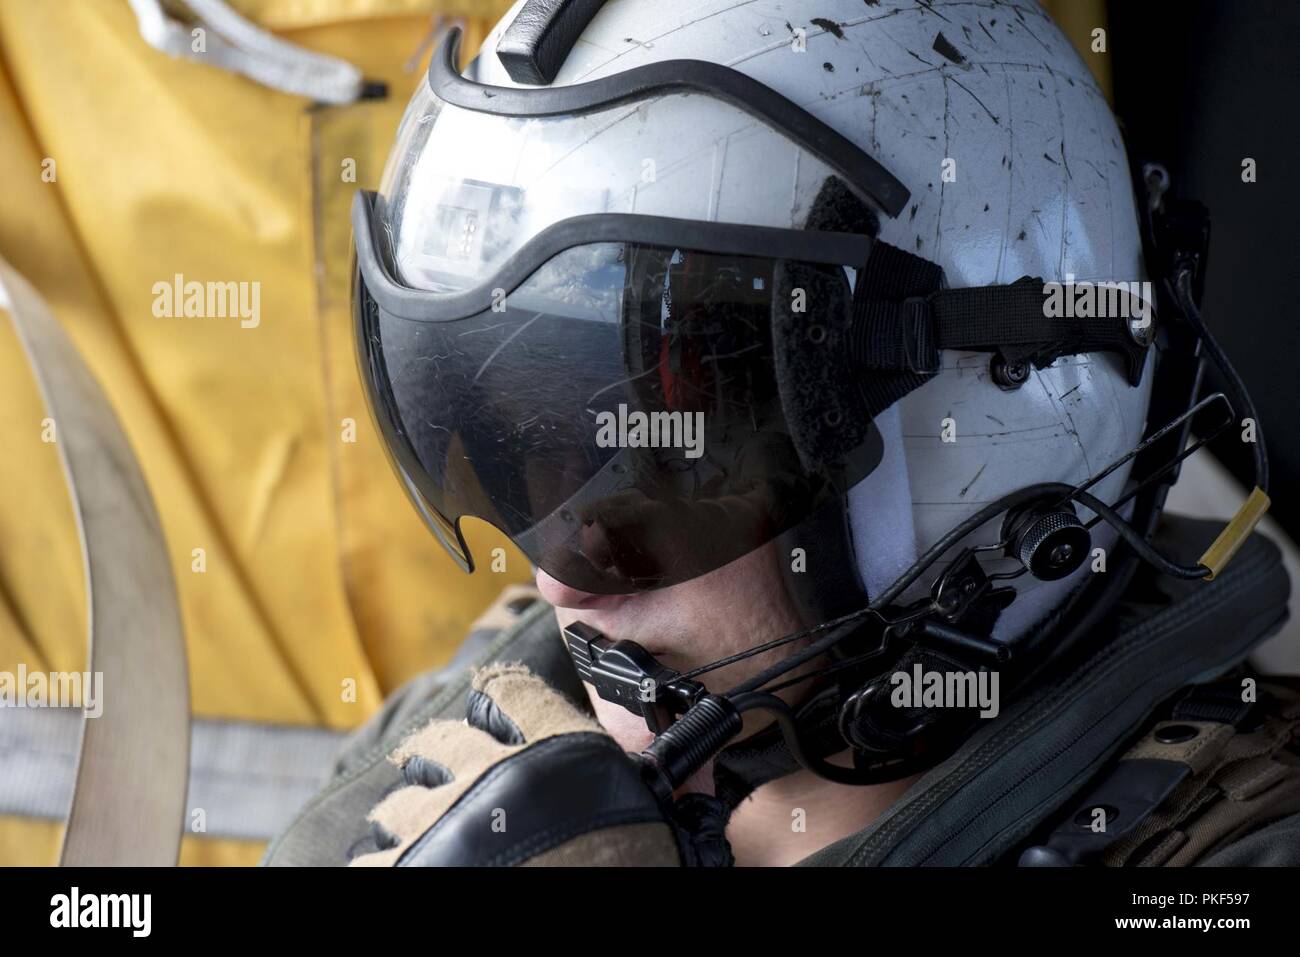 ATLANTIC OCEAN (Aug 4, 2018) Naval Air Crewman (Helicopter) 2rd Class Loren Mills, from Satellite Beach, Florida, looks out the door of an MH-60S Sea Hawk, which is attached to Helicopter Sea Combat Squadron 9, embarked aboard the aircraft carrier USS George H.W. Bush (CVN 77). The ship is underway conducting routine training exercises to maintain carrier readiness. Stock Photo